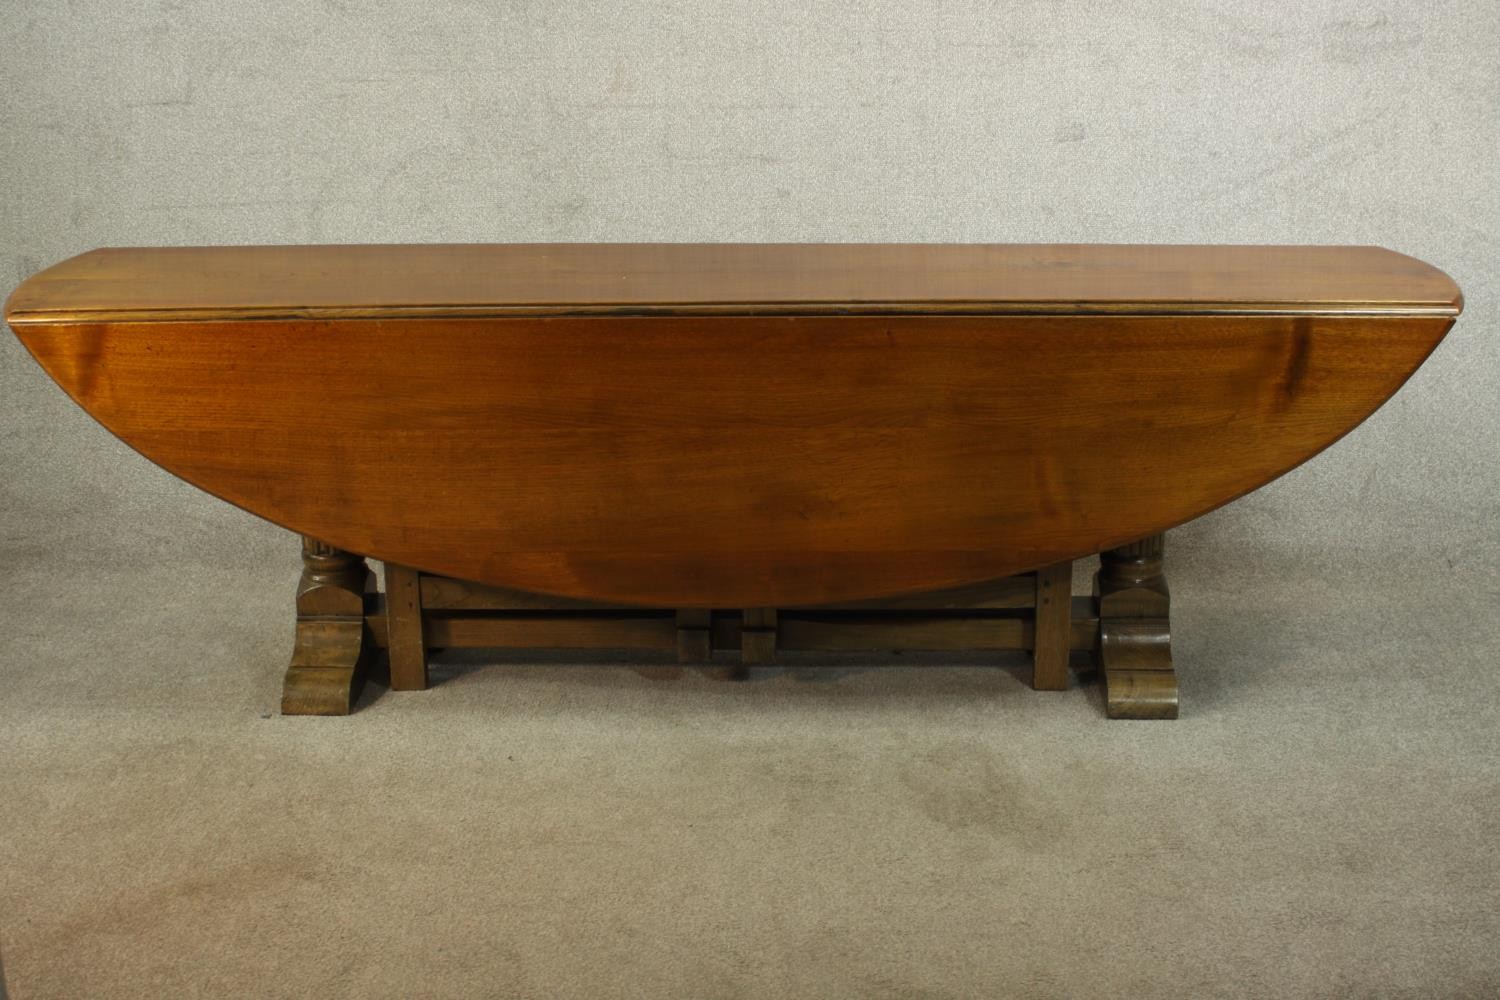 A 20th century oak drop leaf wake table, the oval top with two drop leaves raised on gate legs and